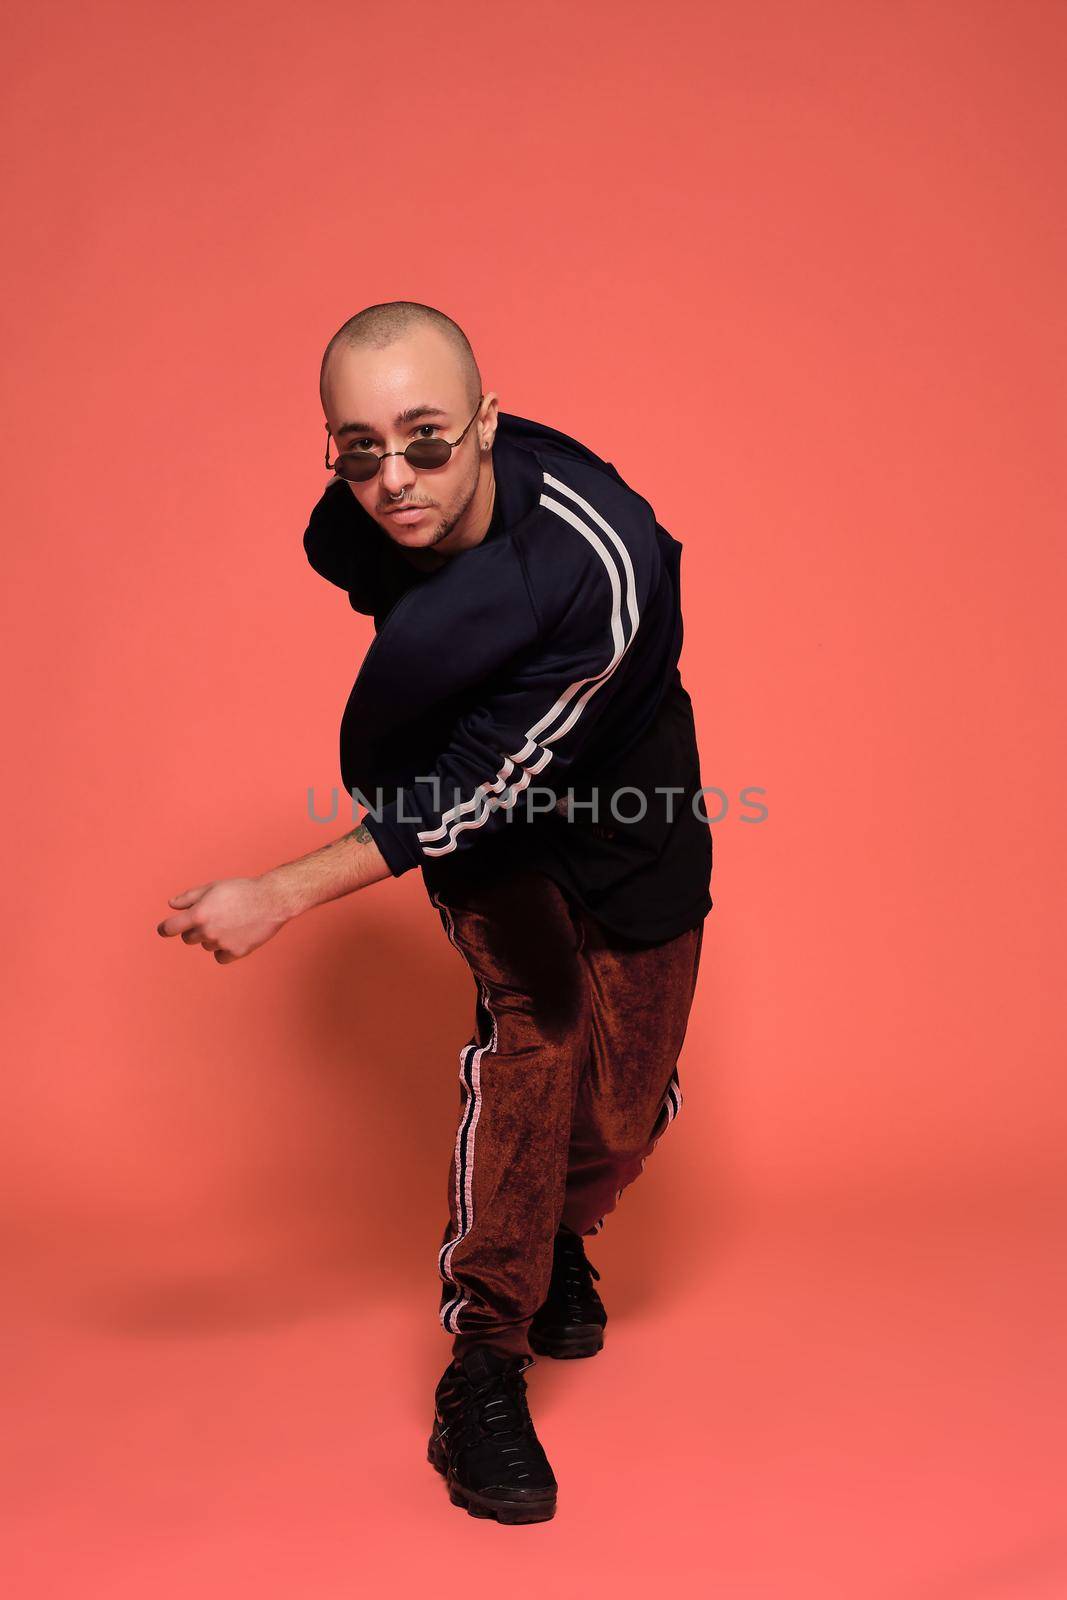 Studio shot of a young tattoed bald man posing against a pink background. 90s style. by nazarovsergey